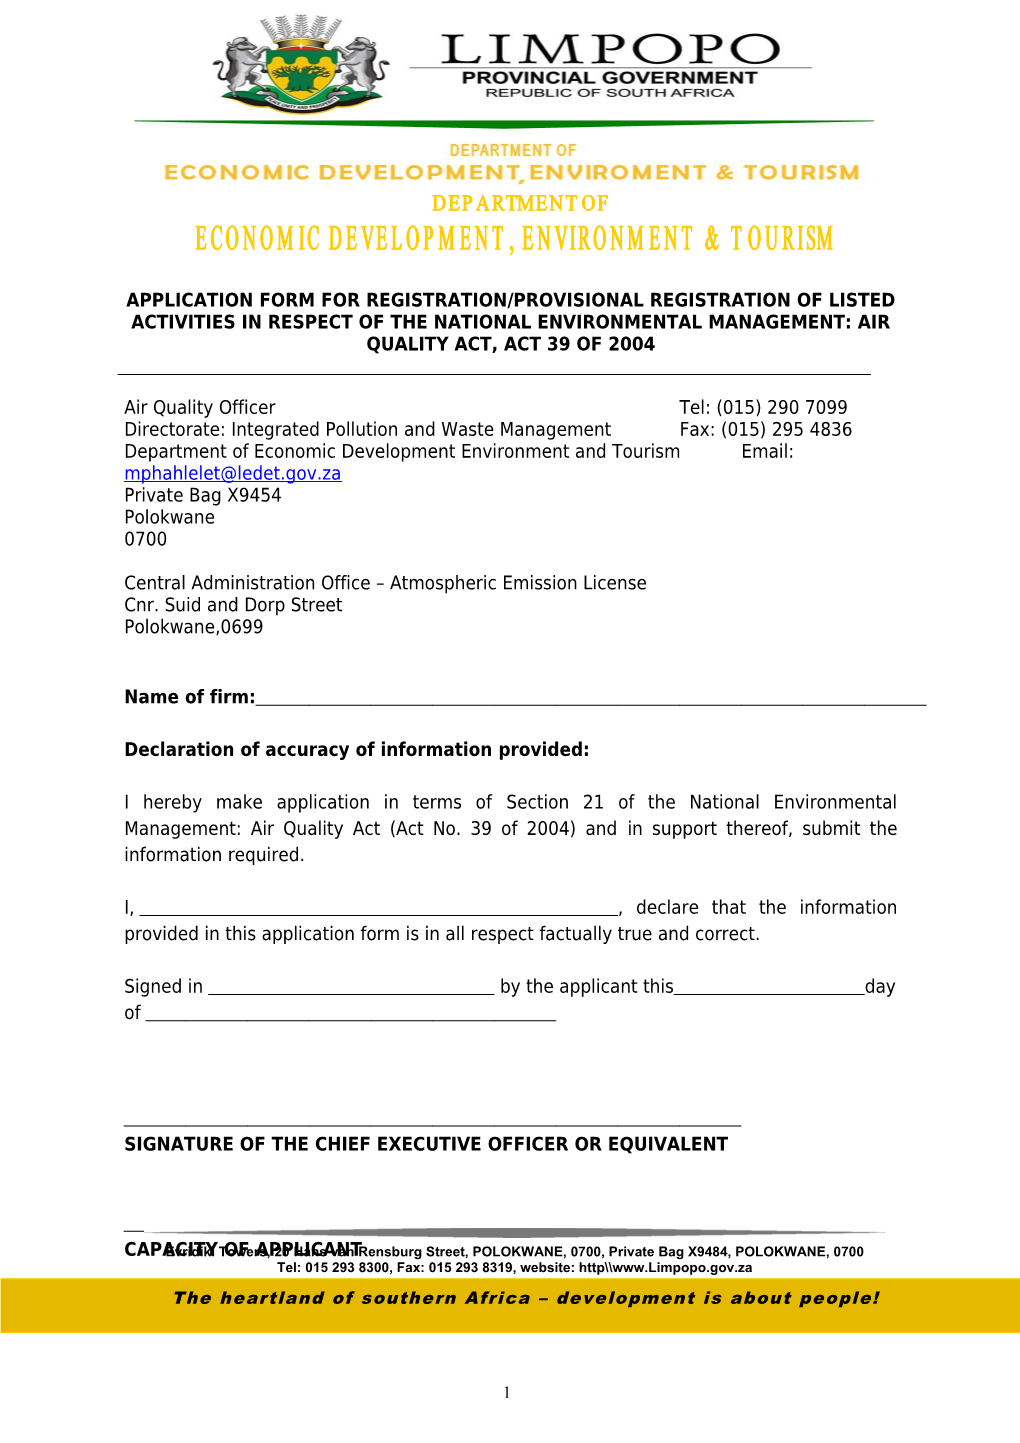 Application Form for Registration/Provisional Registration of Listed Activities in Respect